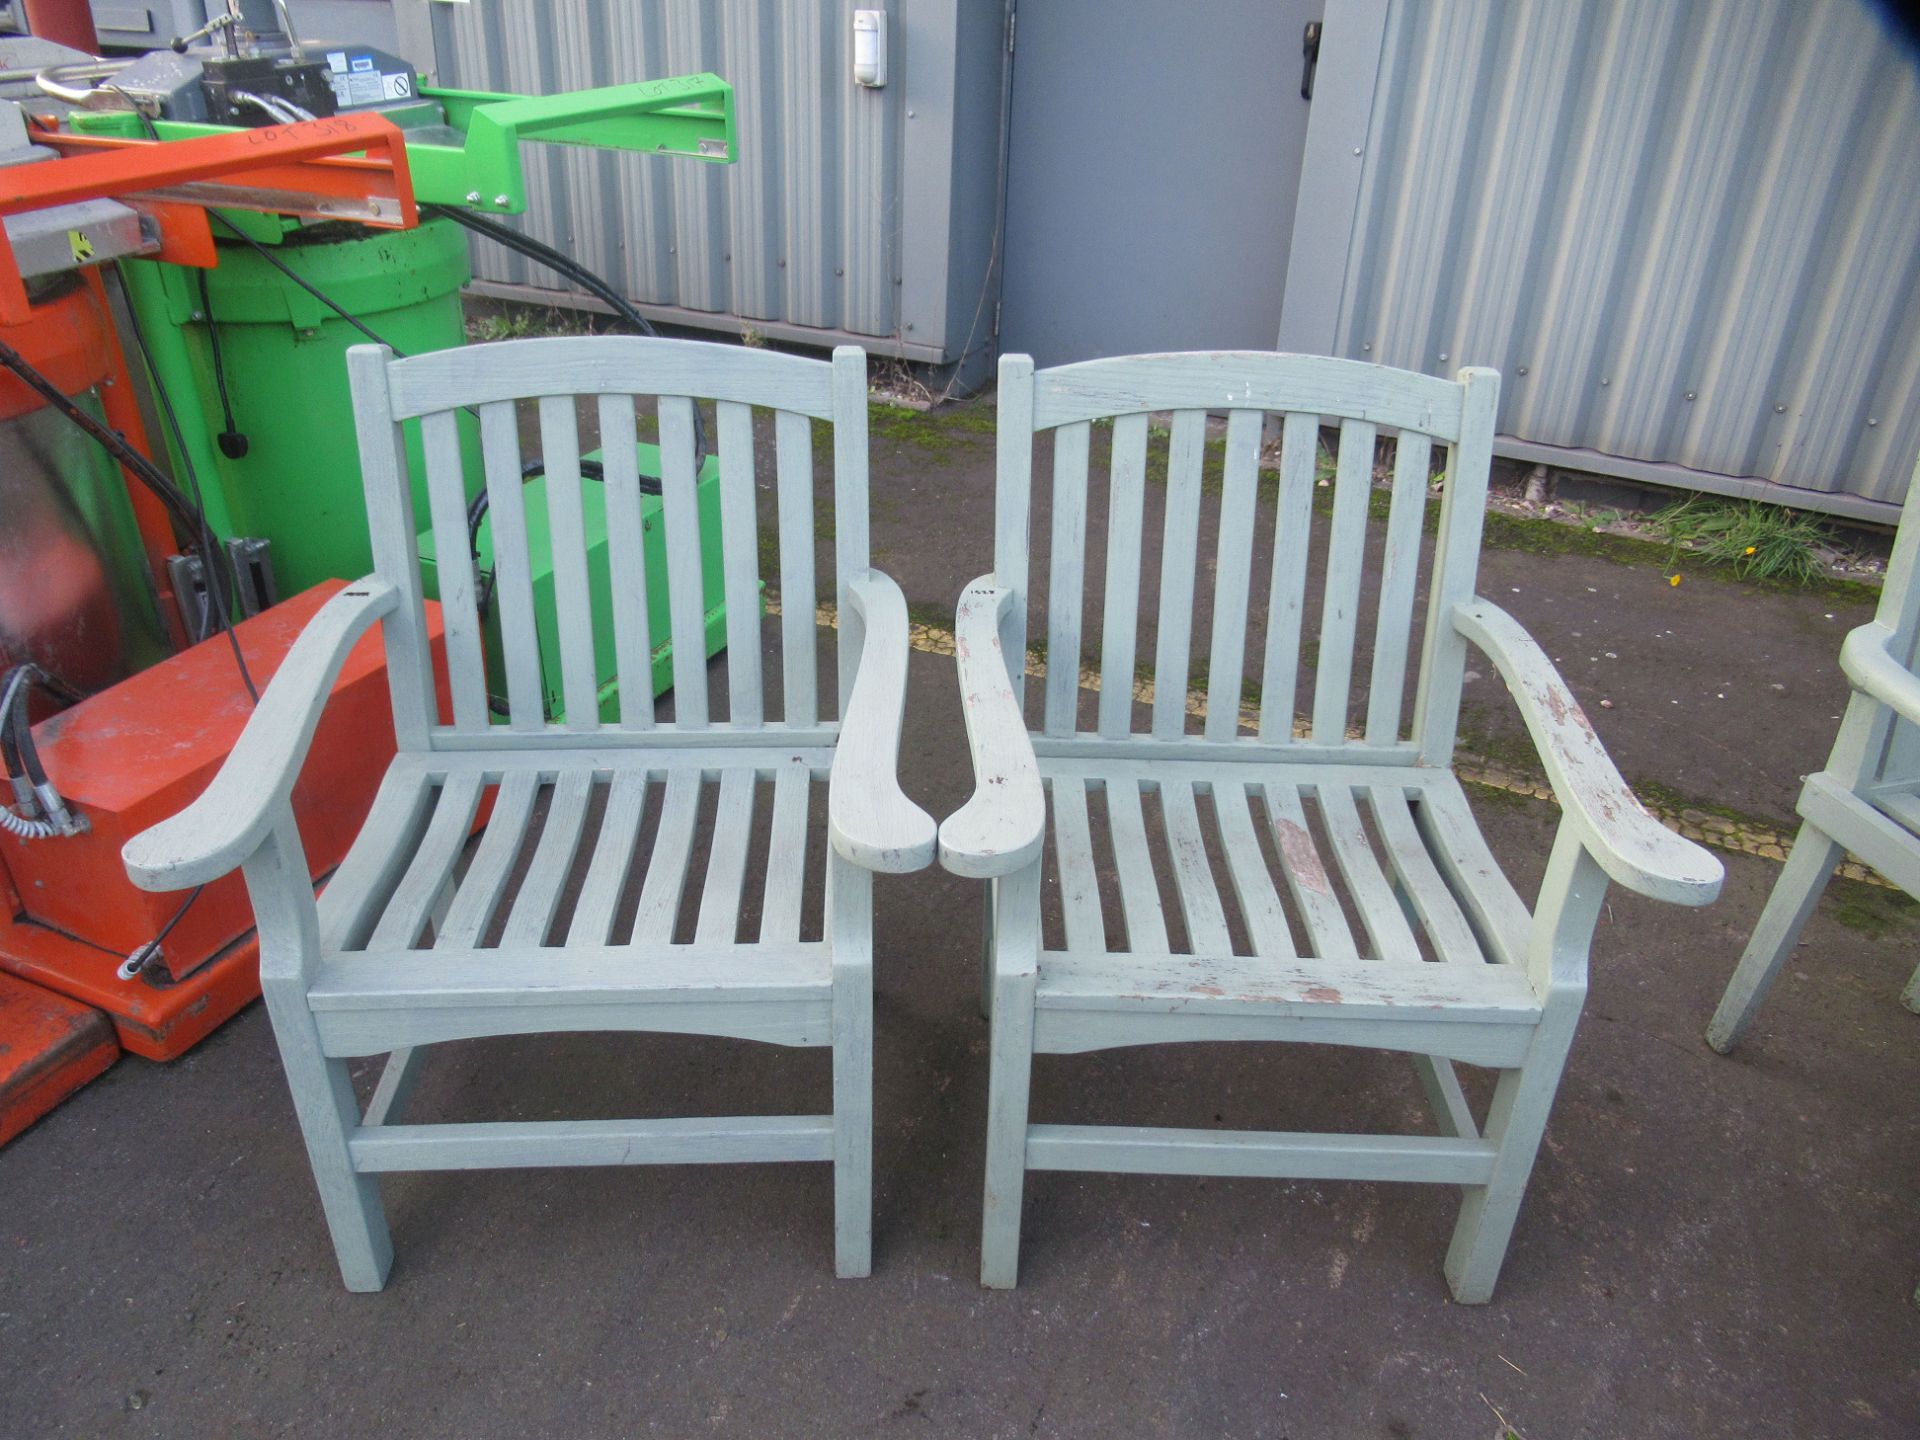 A Pair of Painted Wooden Garden Chairs